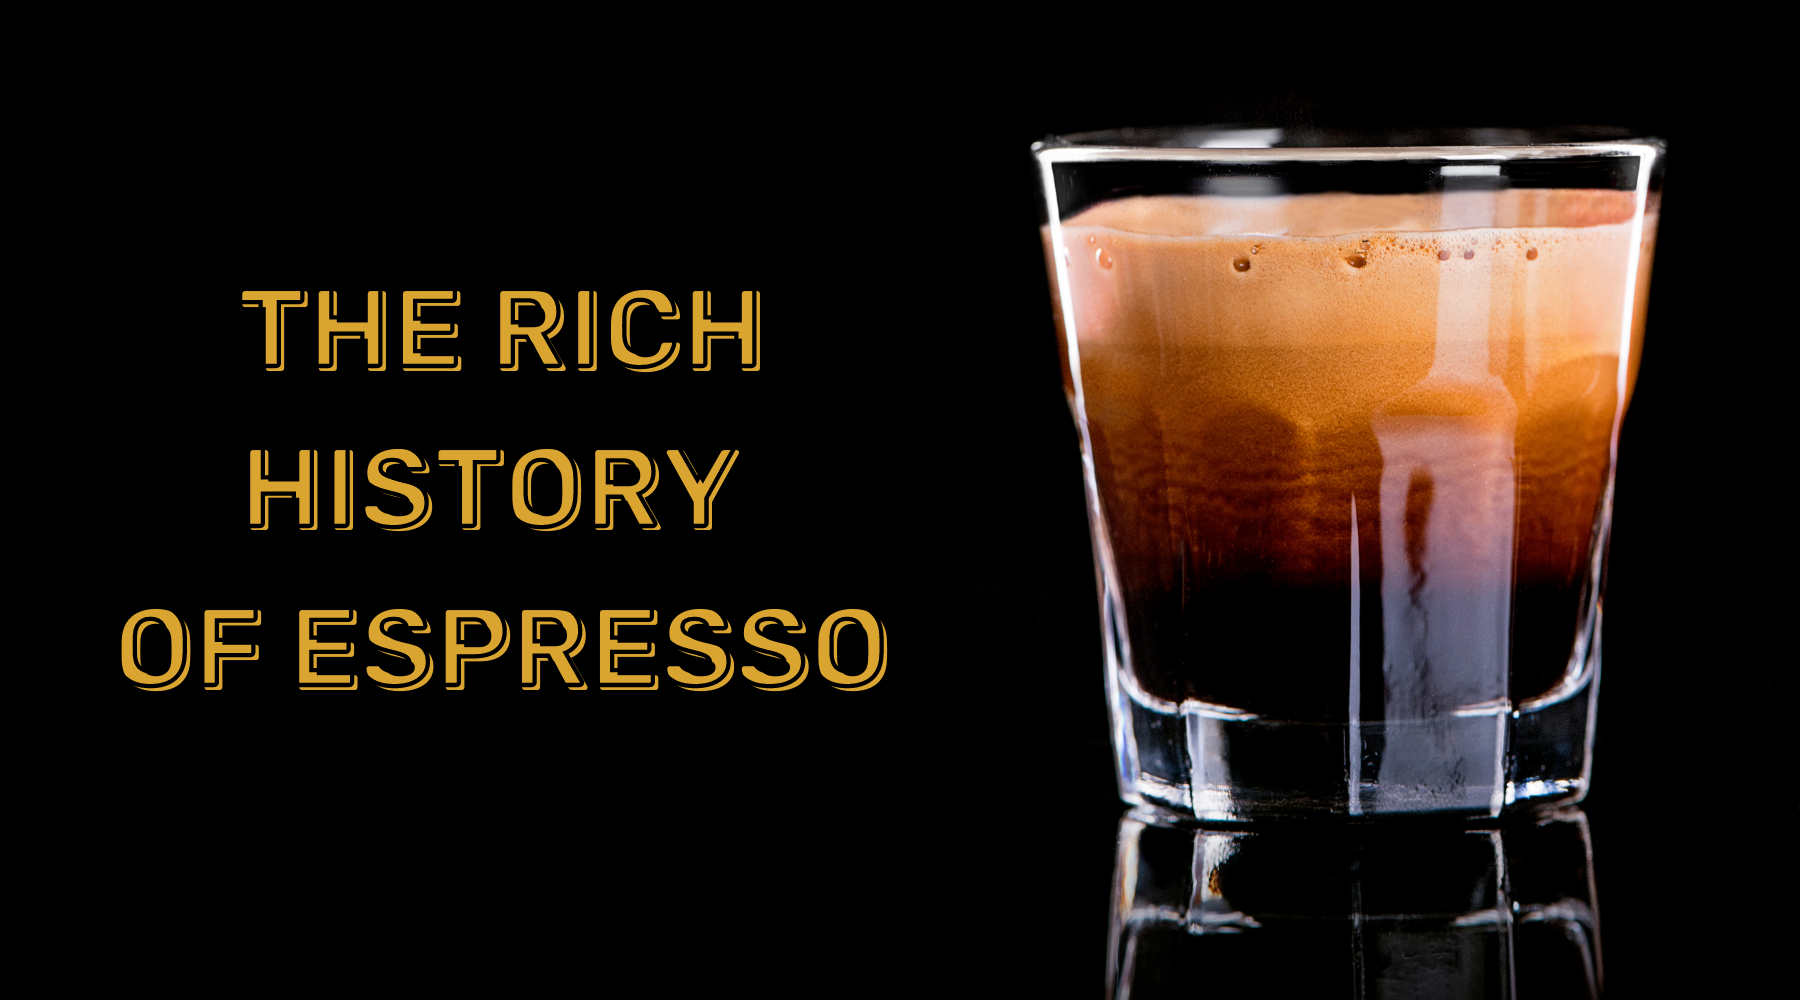 Shot of espresso on a black background with the text "the rich history of espresso"